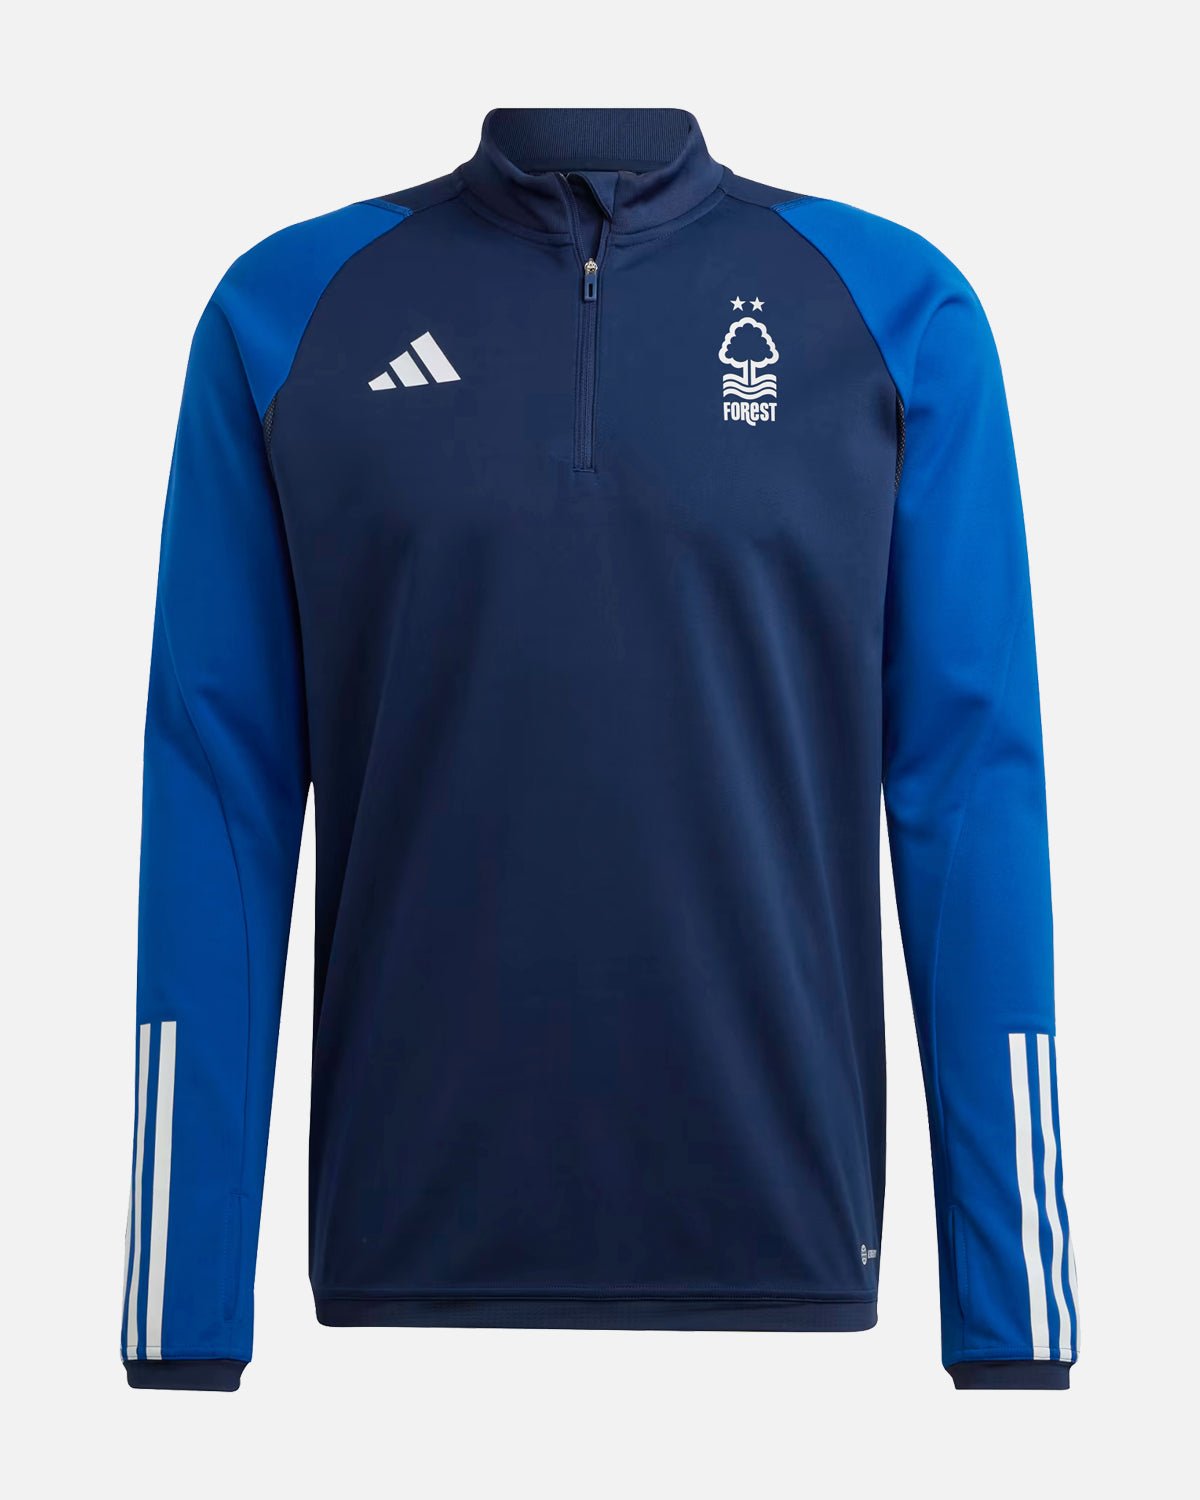 NFFC Navy Training Top 23-24 - Nottingham Forest FC